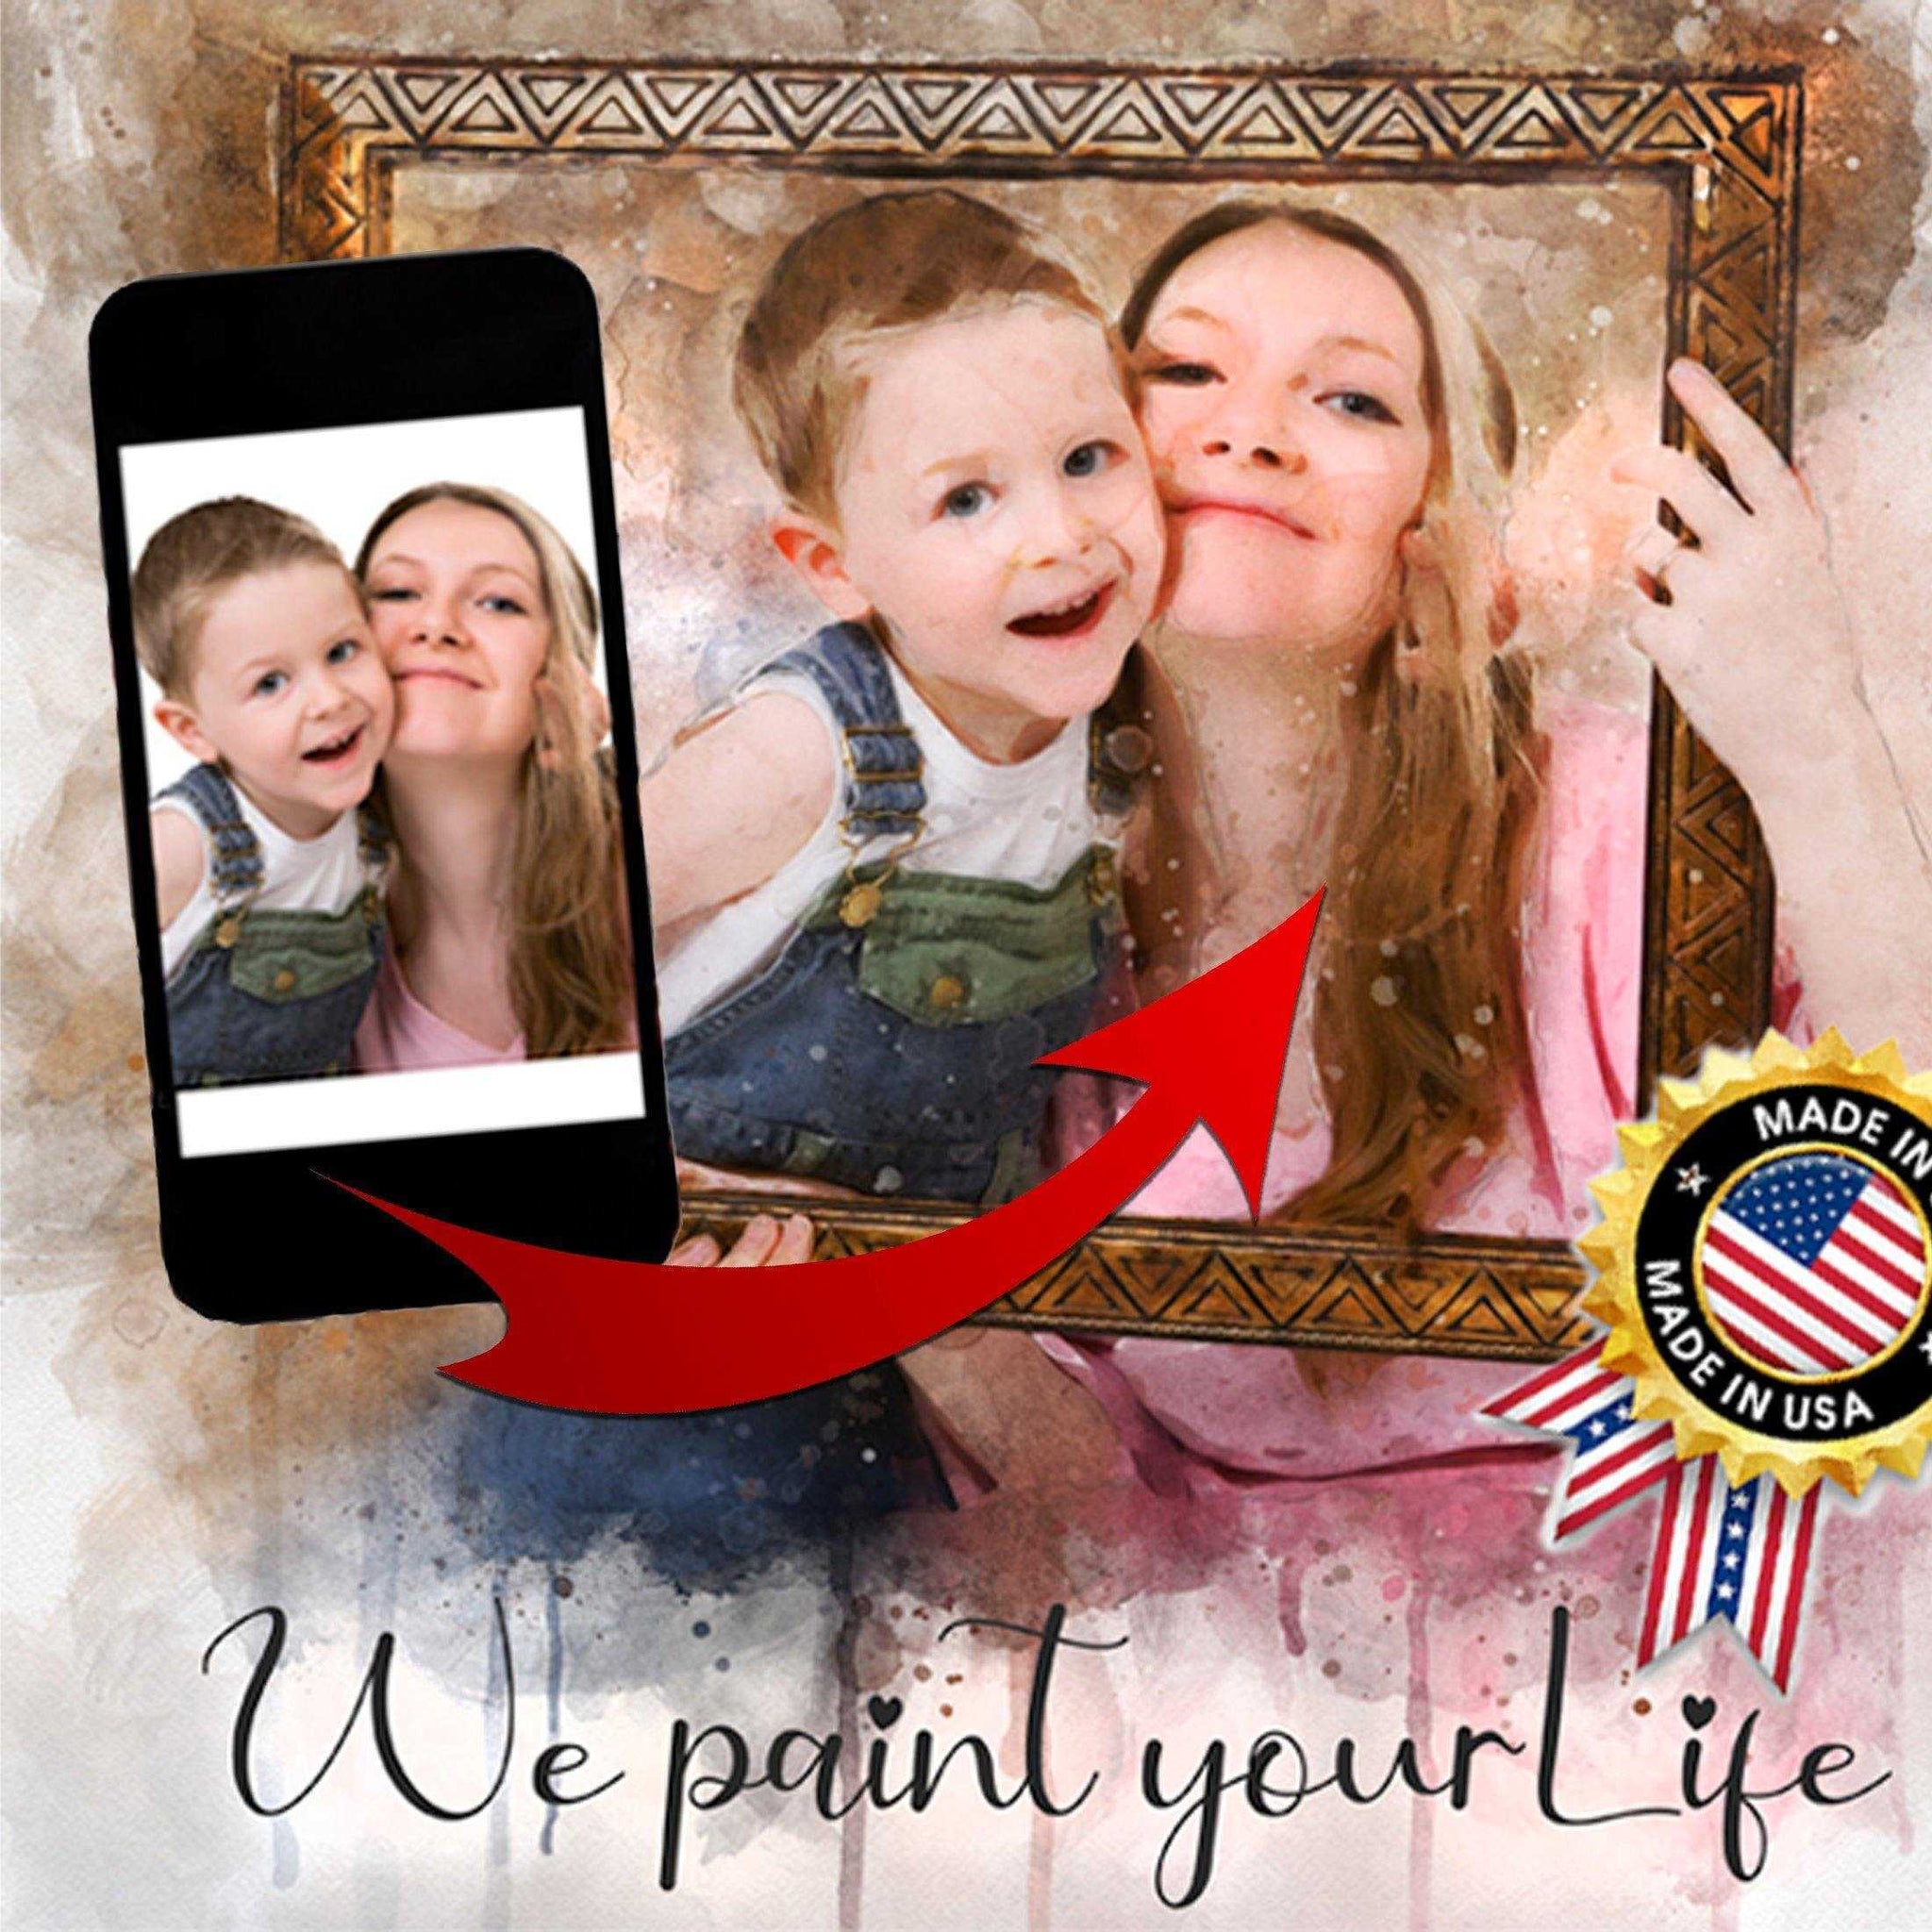 Unique Custom Family Portrait Painting, Personalized Watercolor Family Painting on Framed Canvas - FromPicToArt